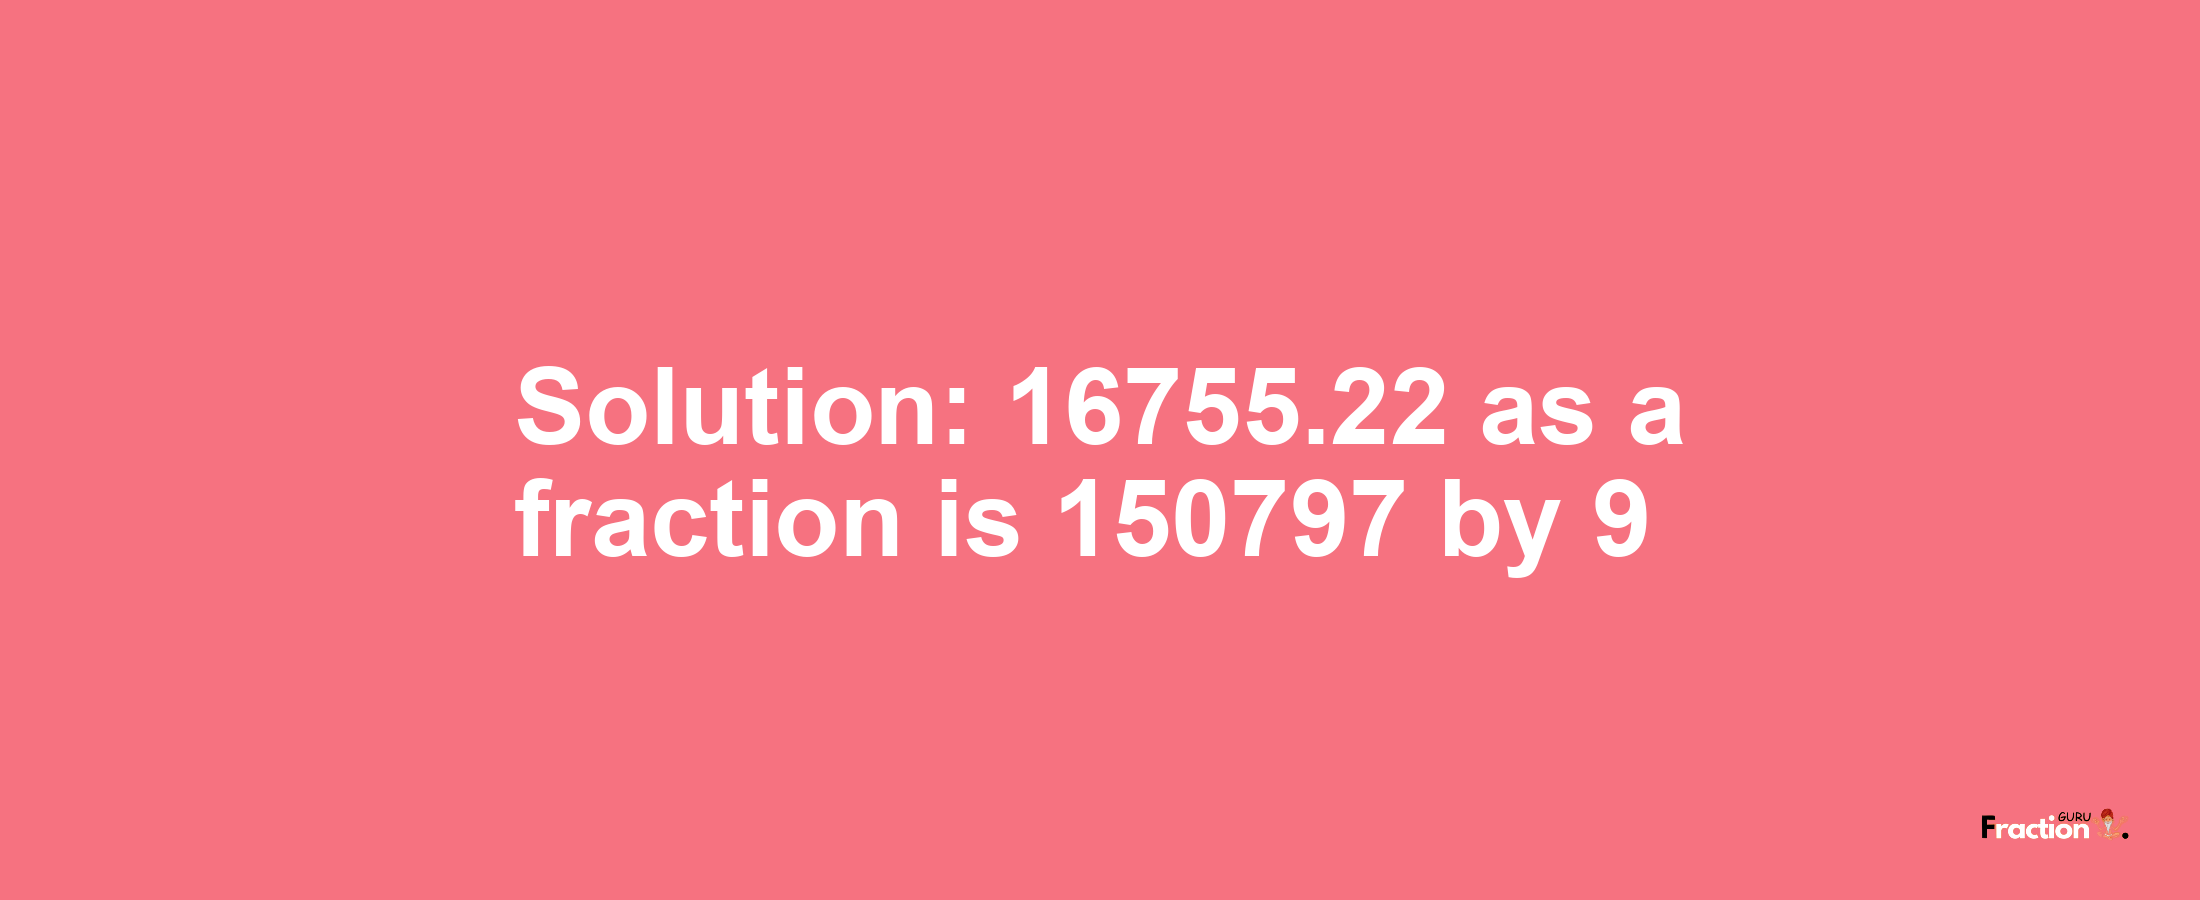 Solution:16755.22 as a fraction is 150797/9